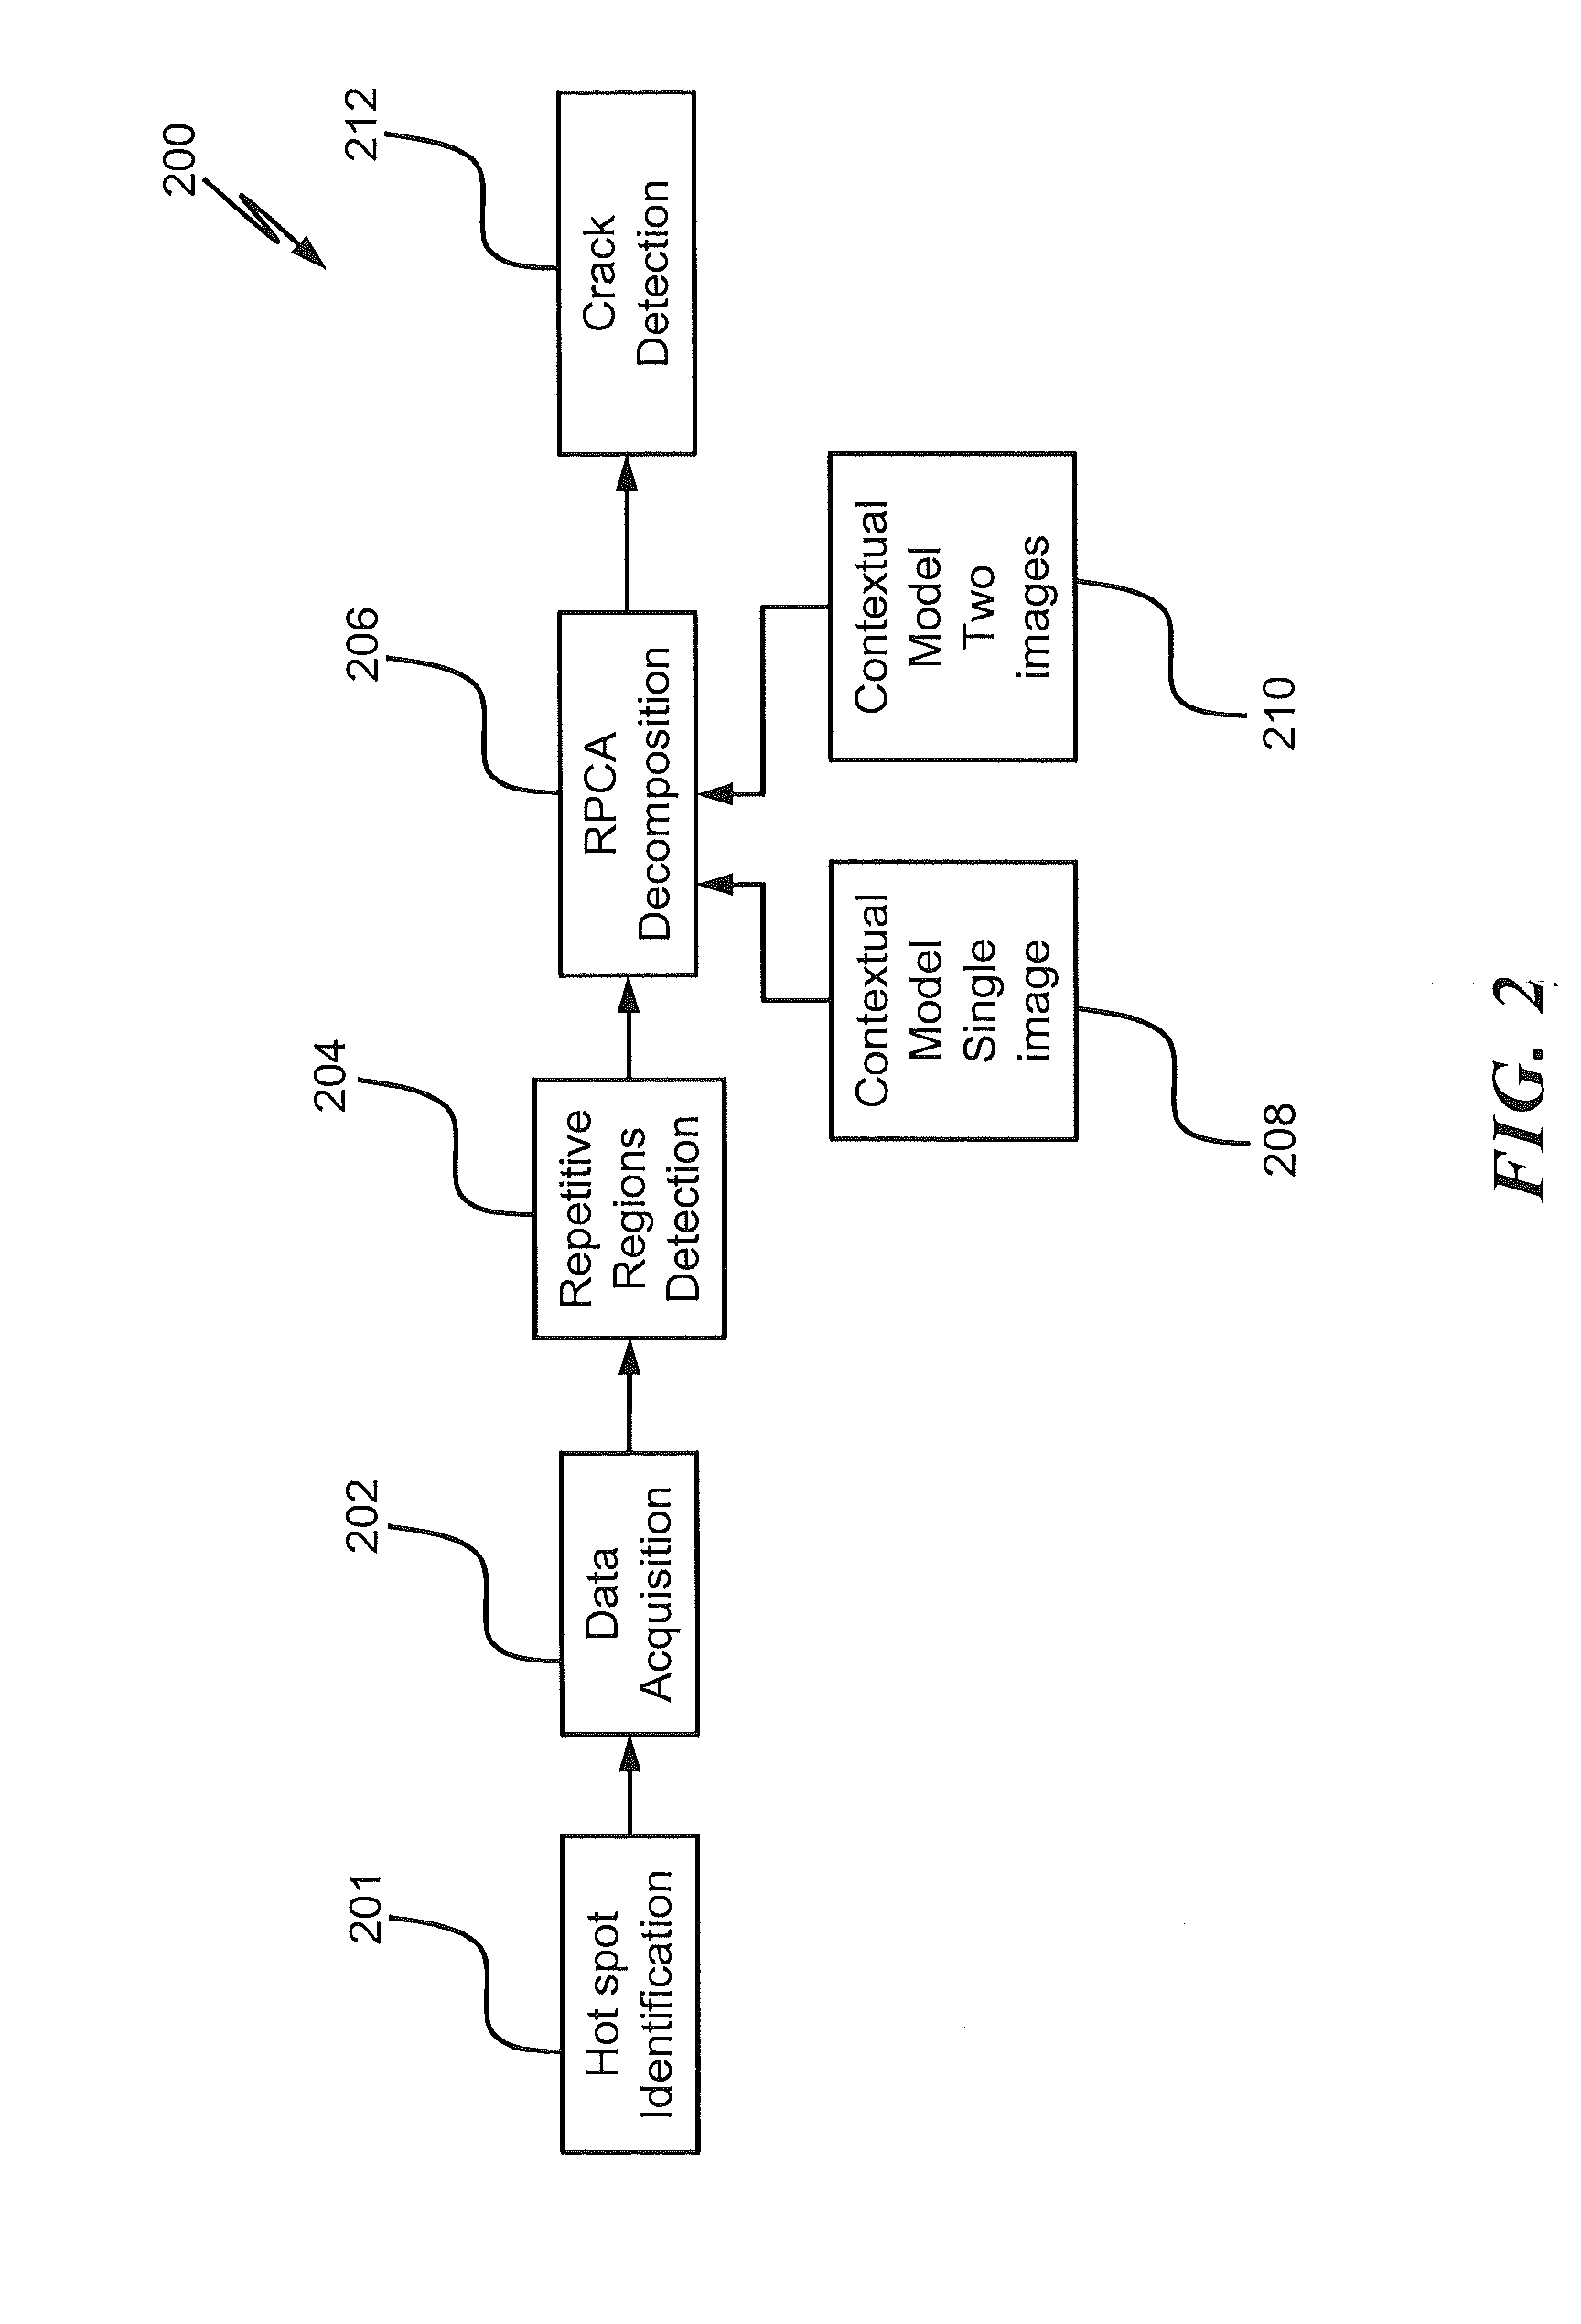 Structural hot spot and critical location monitoring system and method